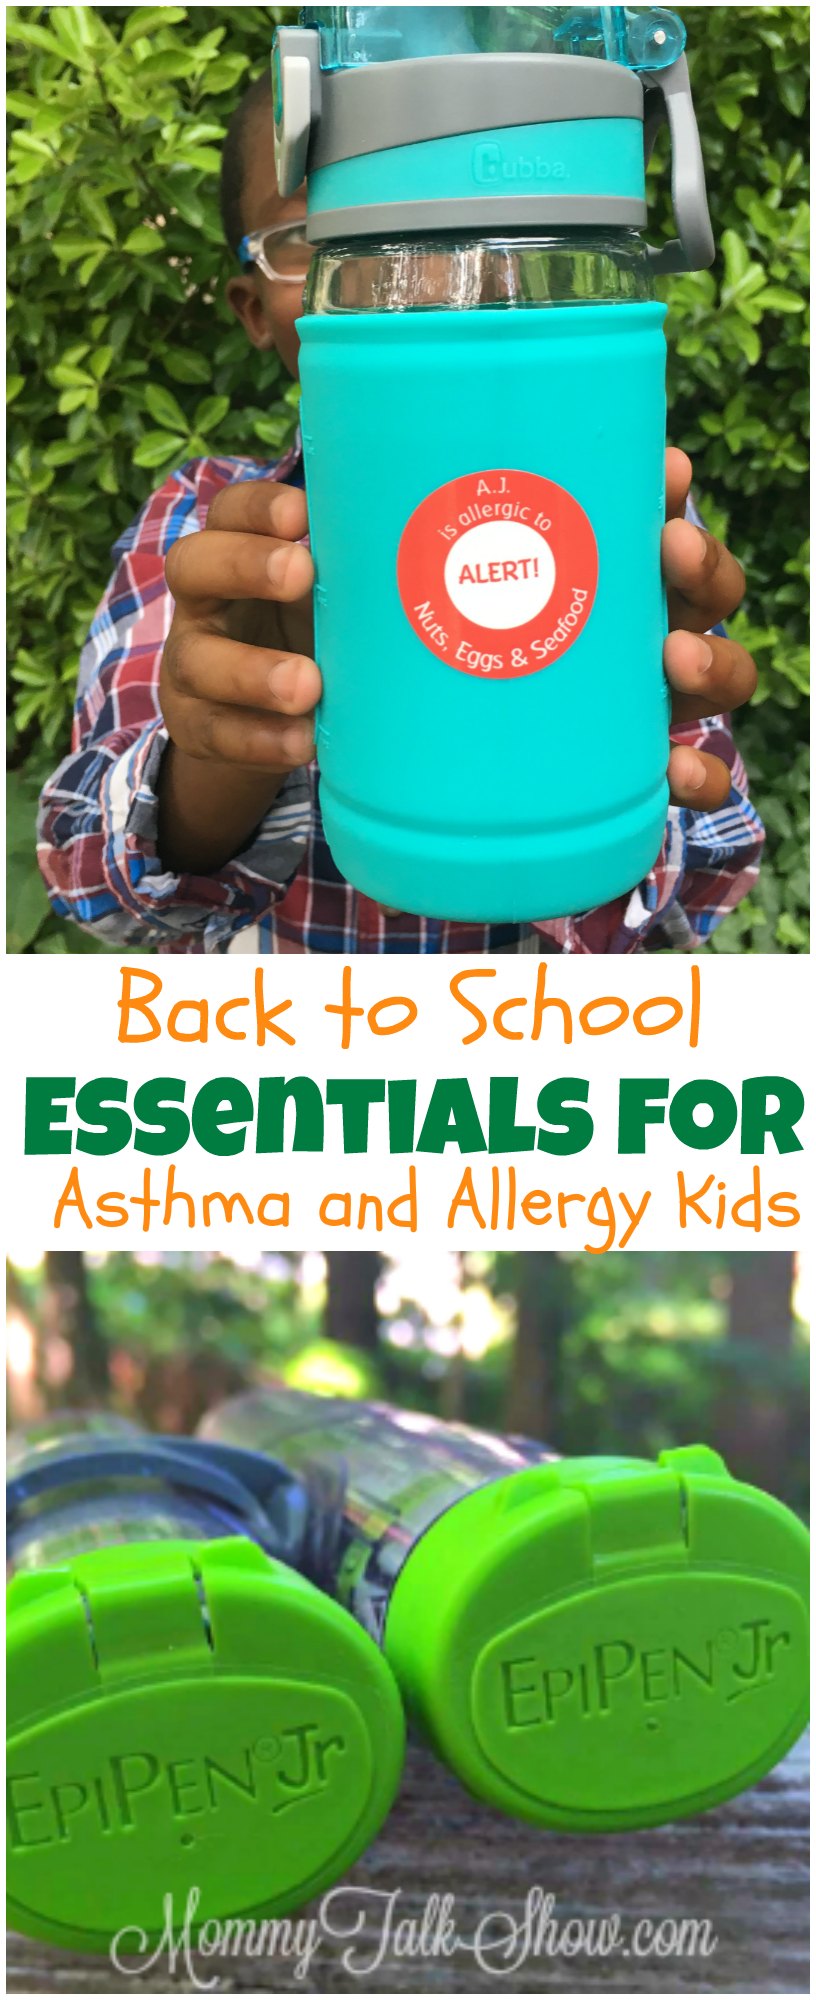 Back to School Essentials for Asthma and Allergy Kids